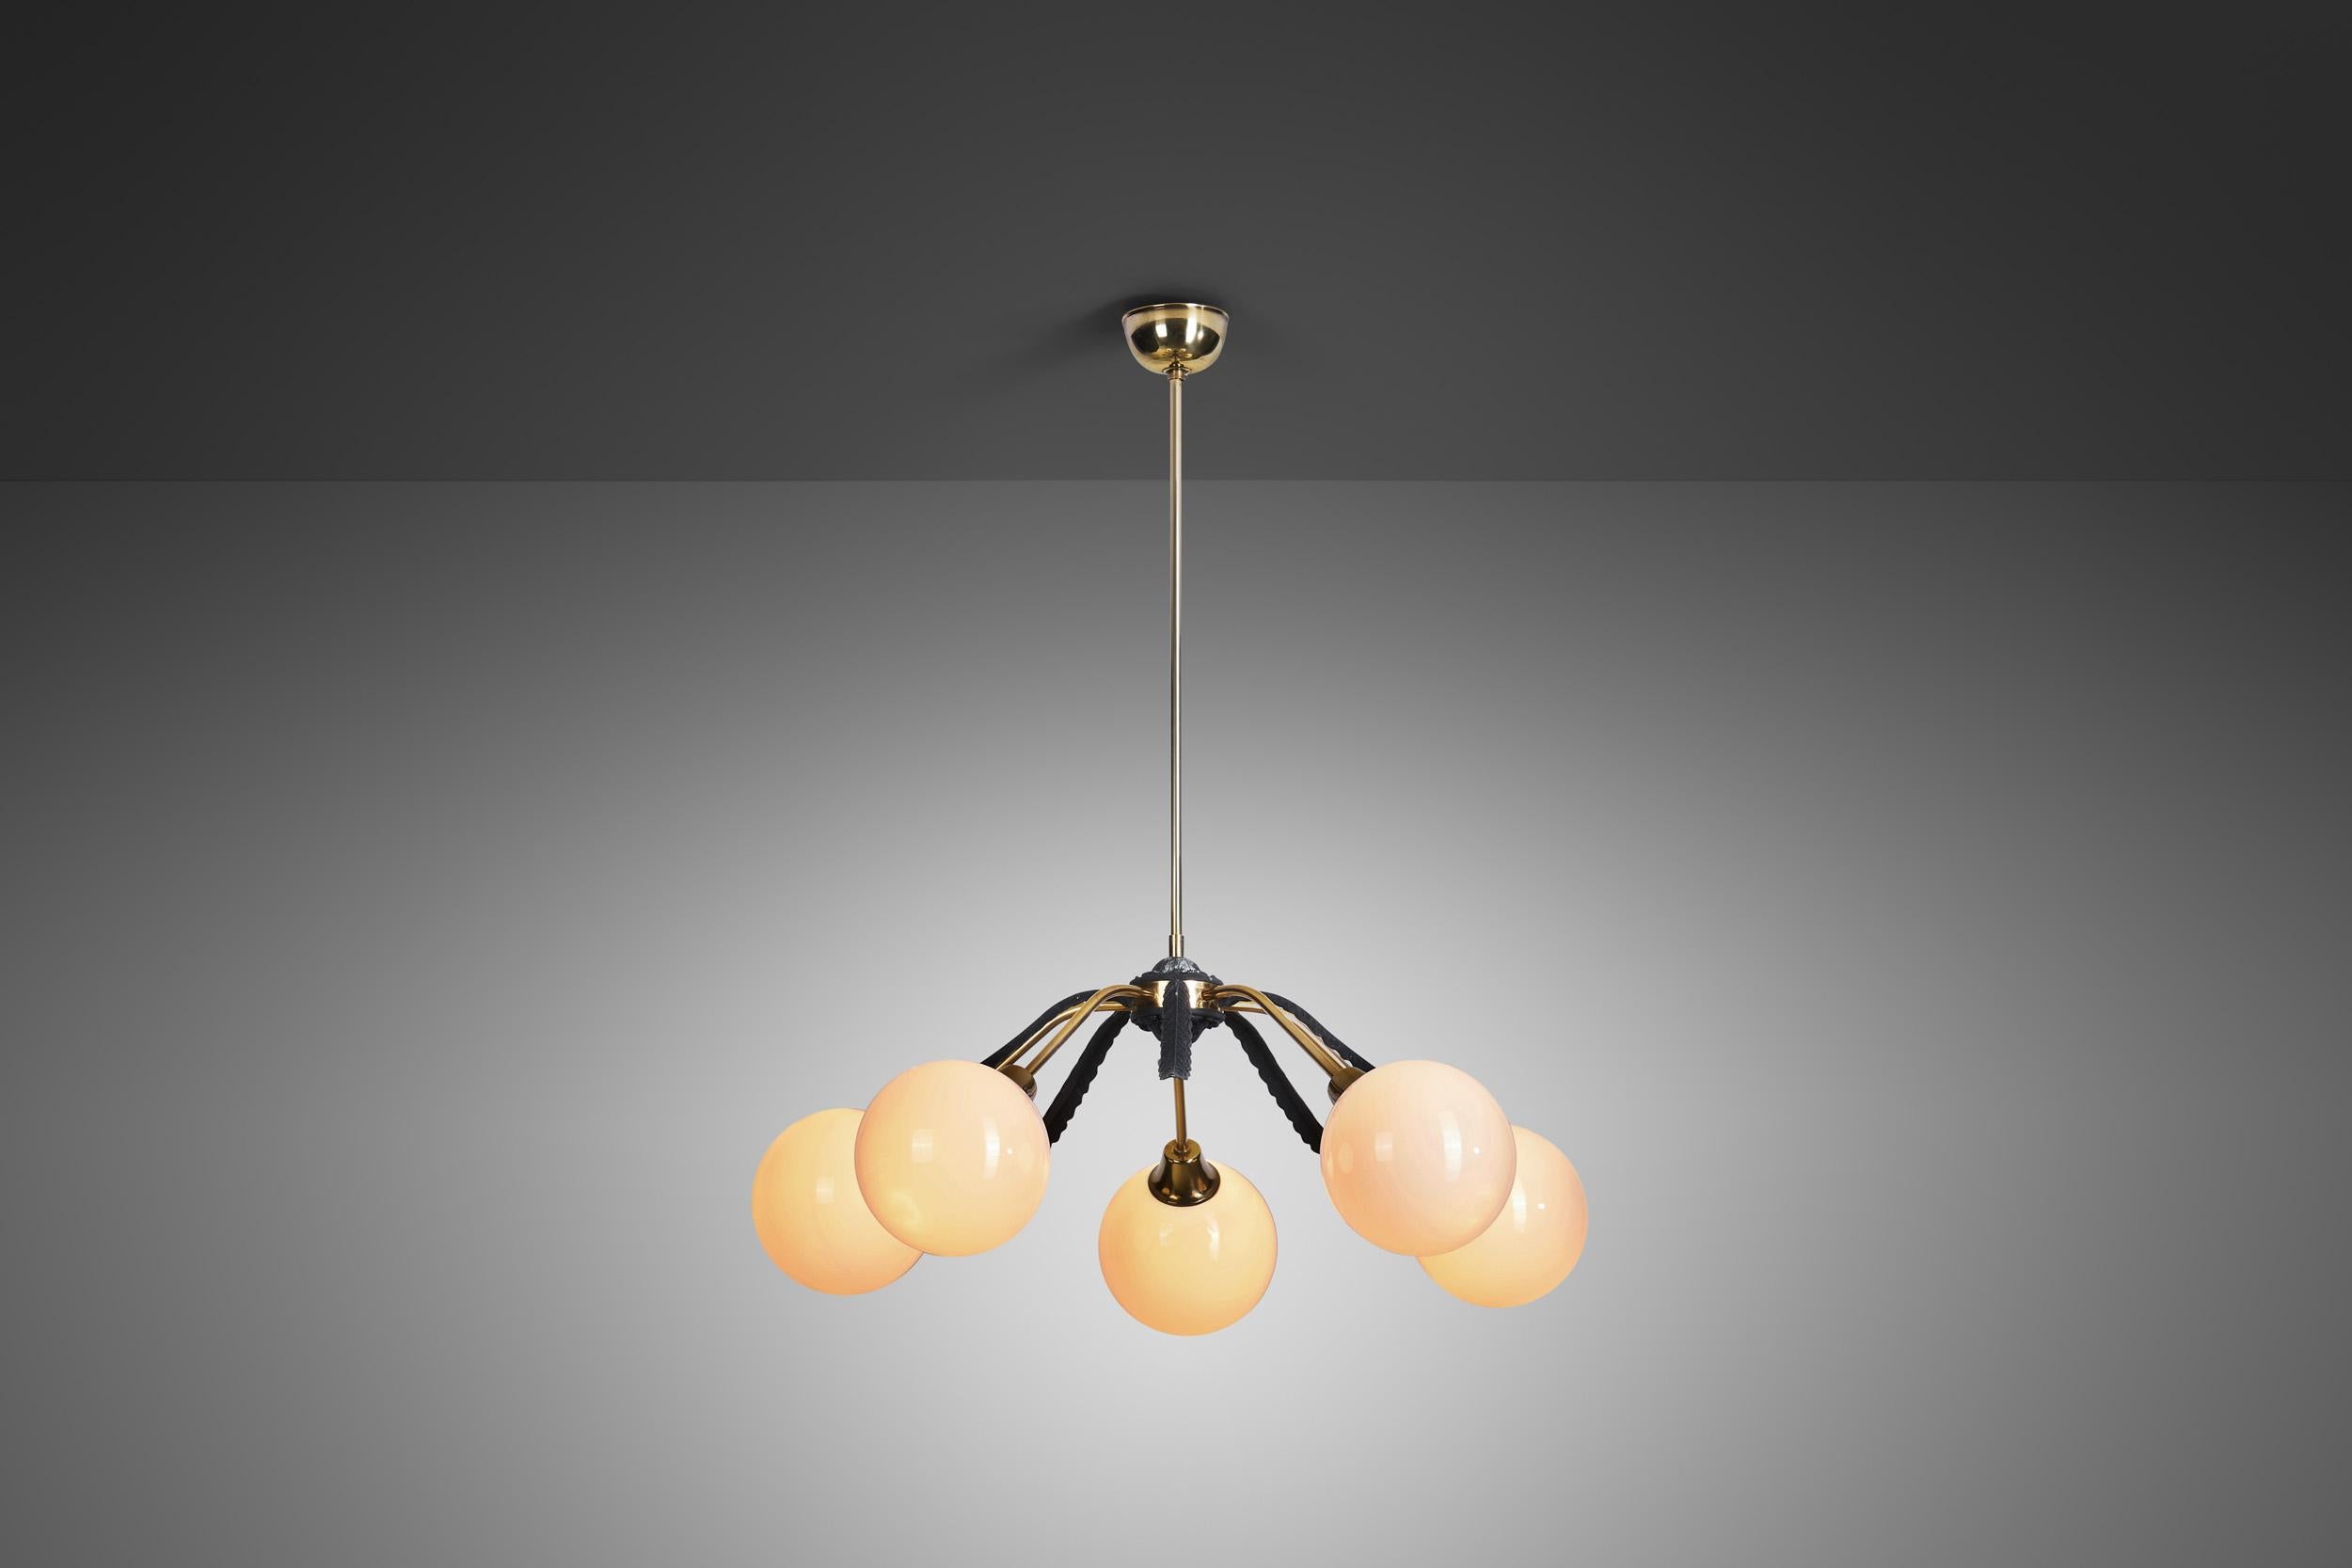 Mid-Century Modern pieces function very well because of their simplicity and fine craftsmanship. What unites the European lighting models of the era can be observed in this ceiling lamp: a clear design that can be enjoyed without being distracted by